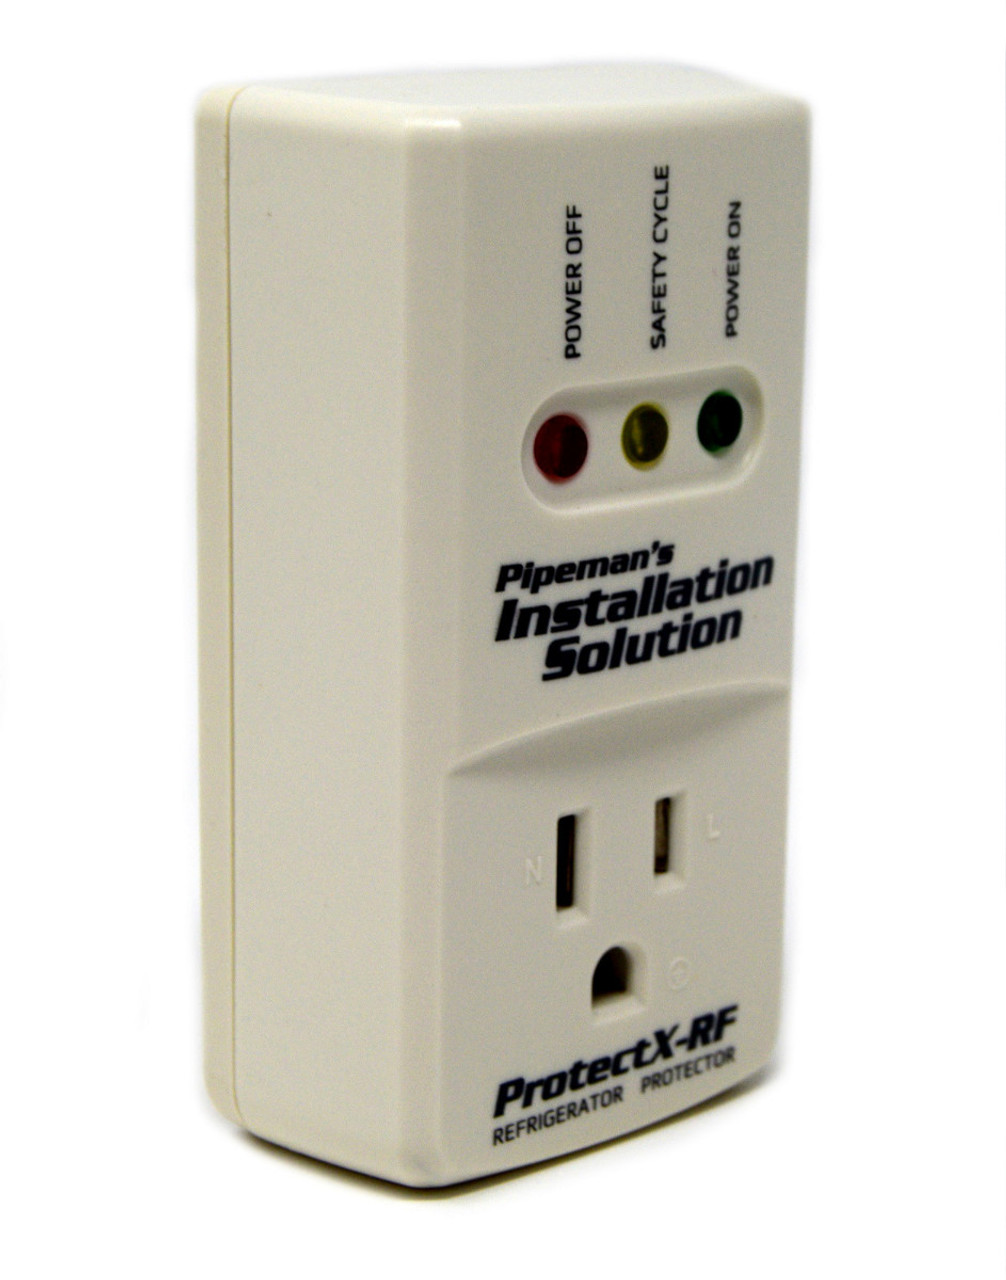 2-Pack 1800 Watts Refrigerator Voltage Surge Protector Appliance (New  Model) - Best Connections